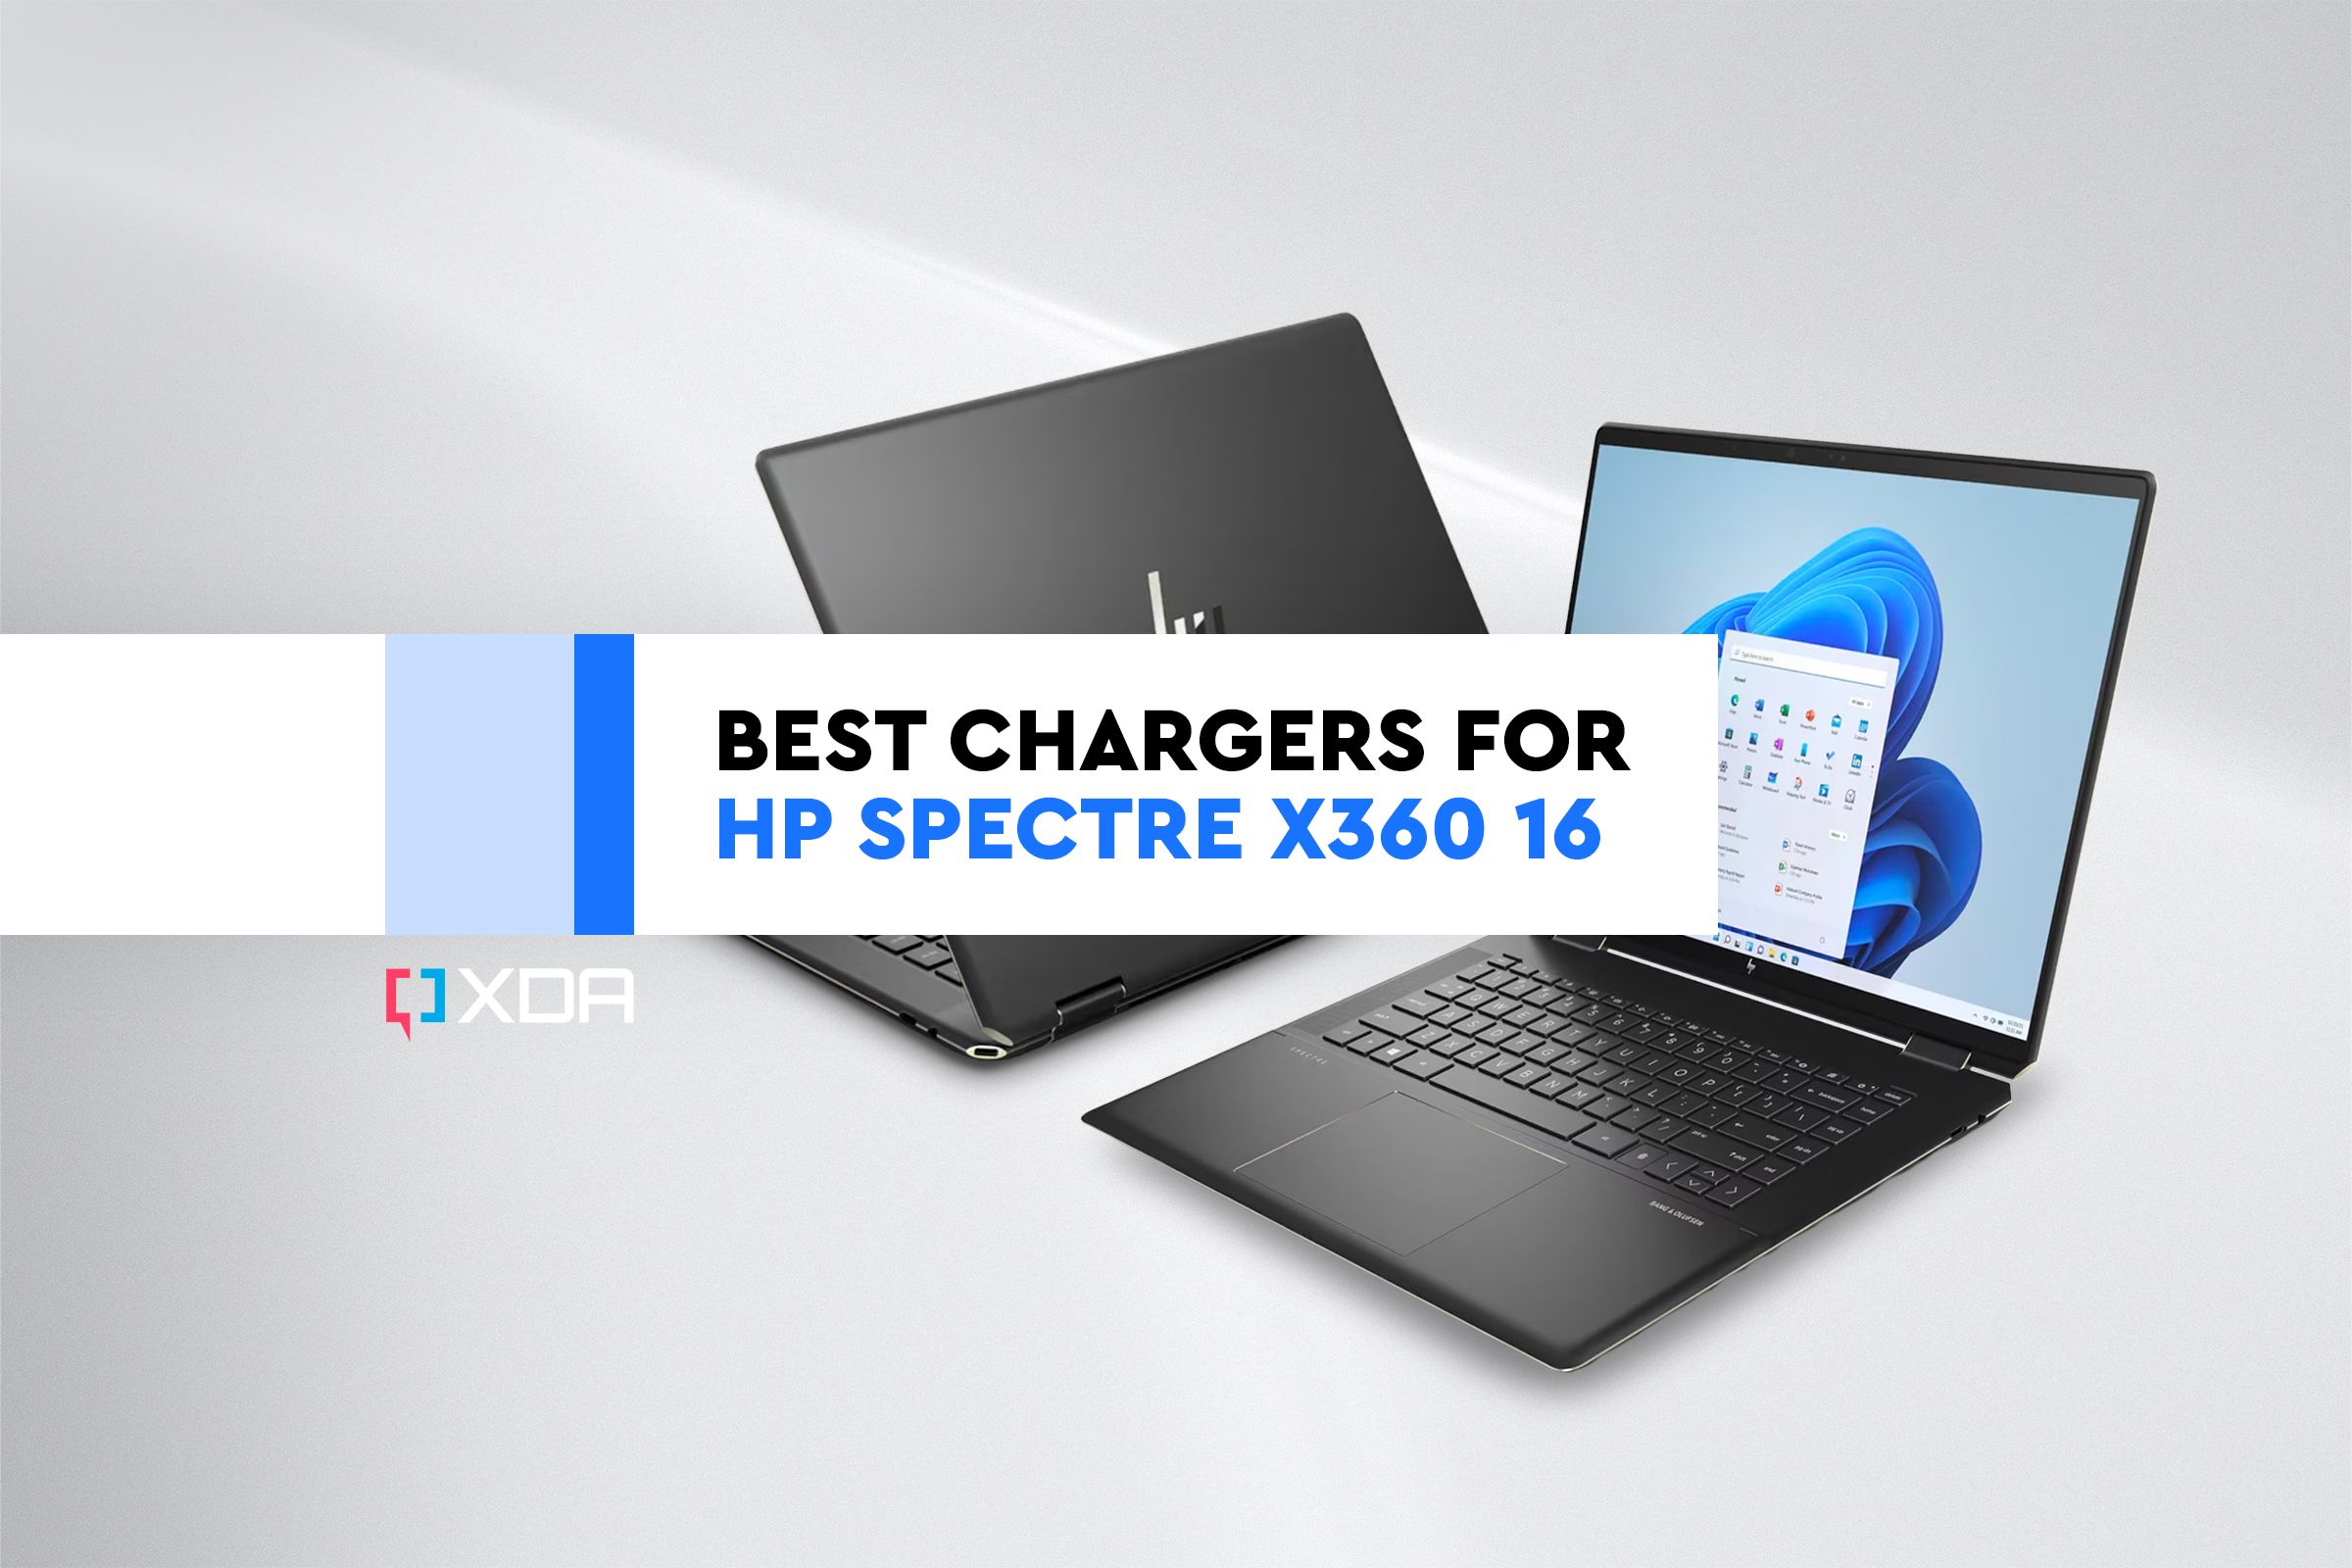 Best chargers for HP Spectre x360 16